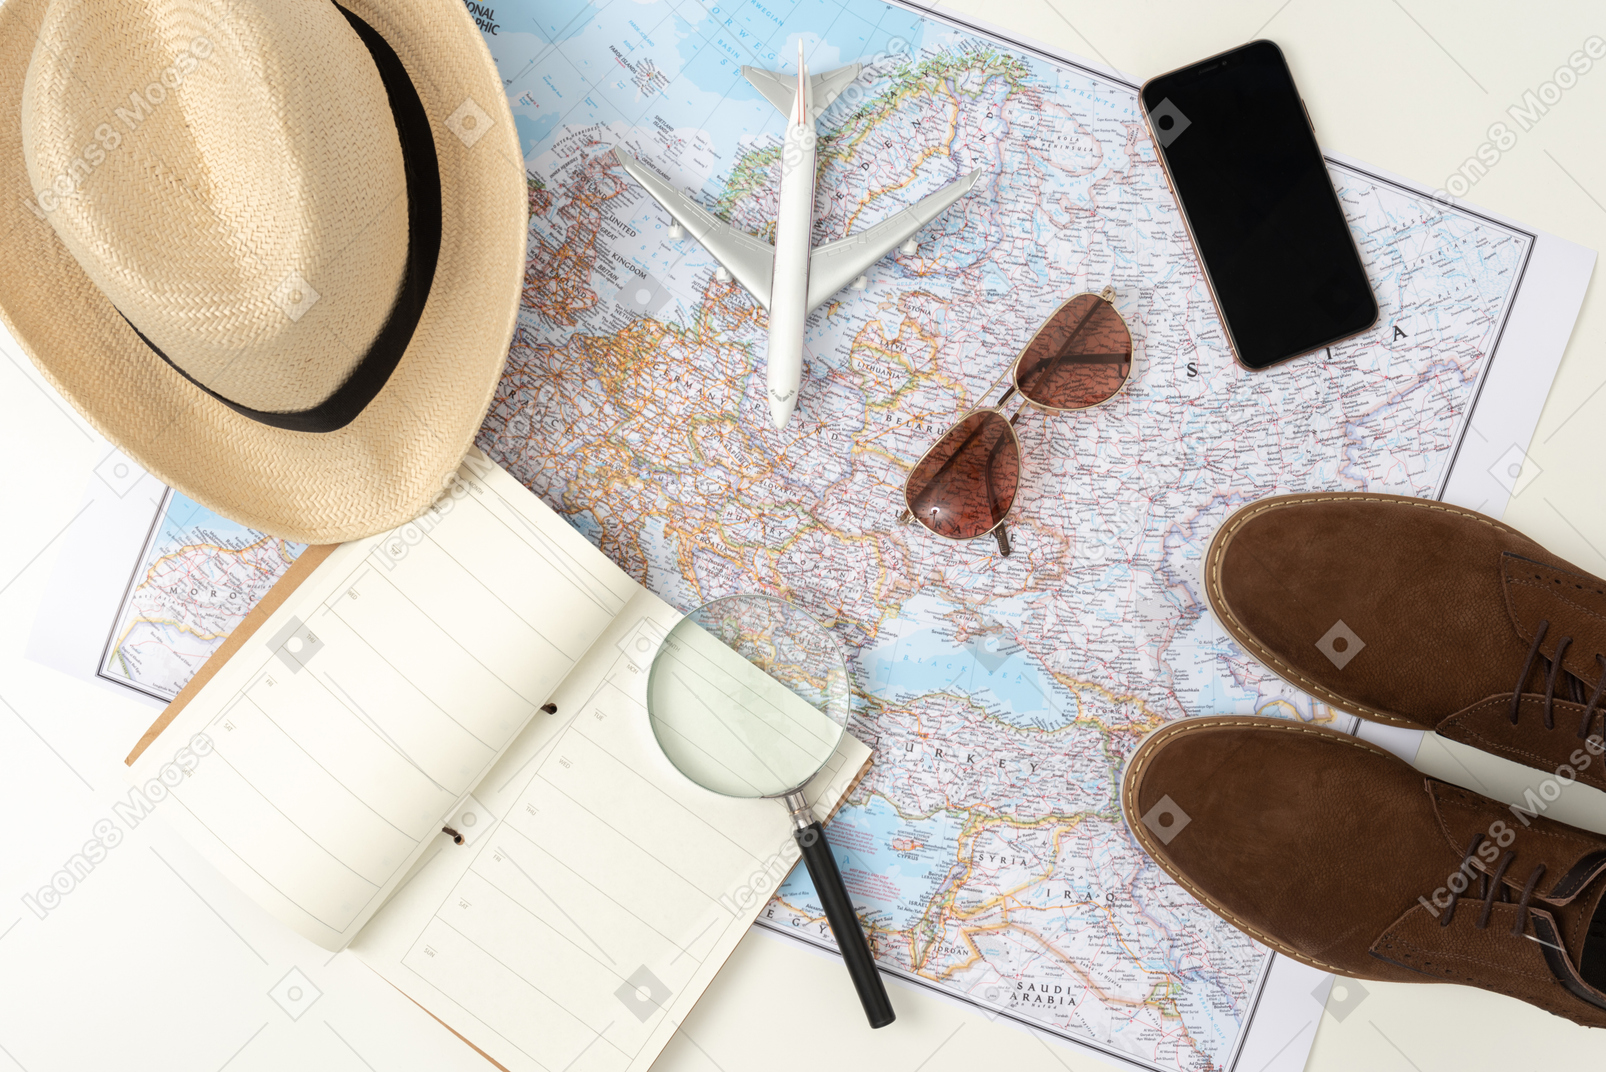 Buying nice things for the upcoming trip is fun as you get to choose your new shades, new cool boots, a brand new planner and of course you get to rock your new amazing straw hat!